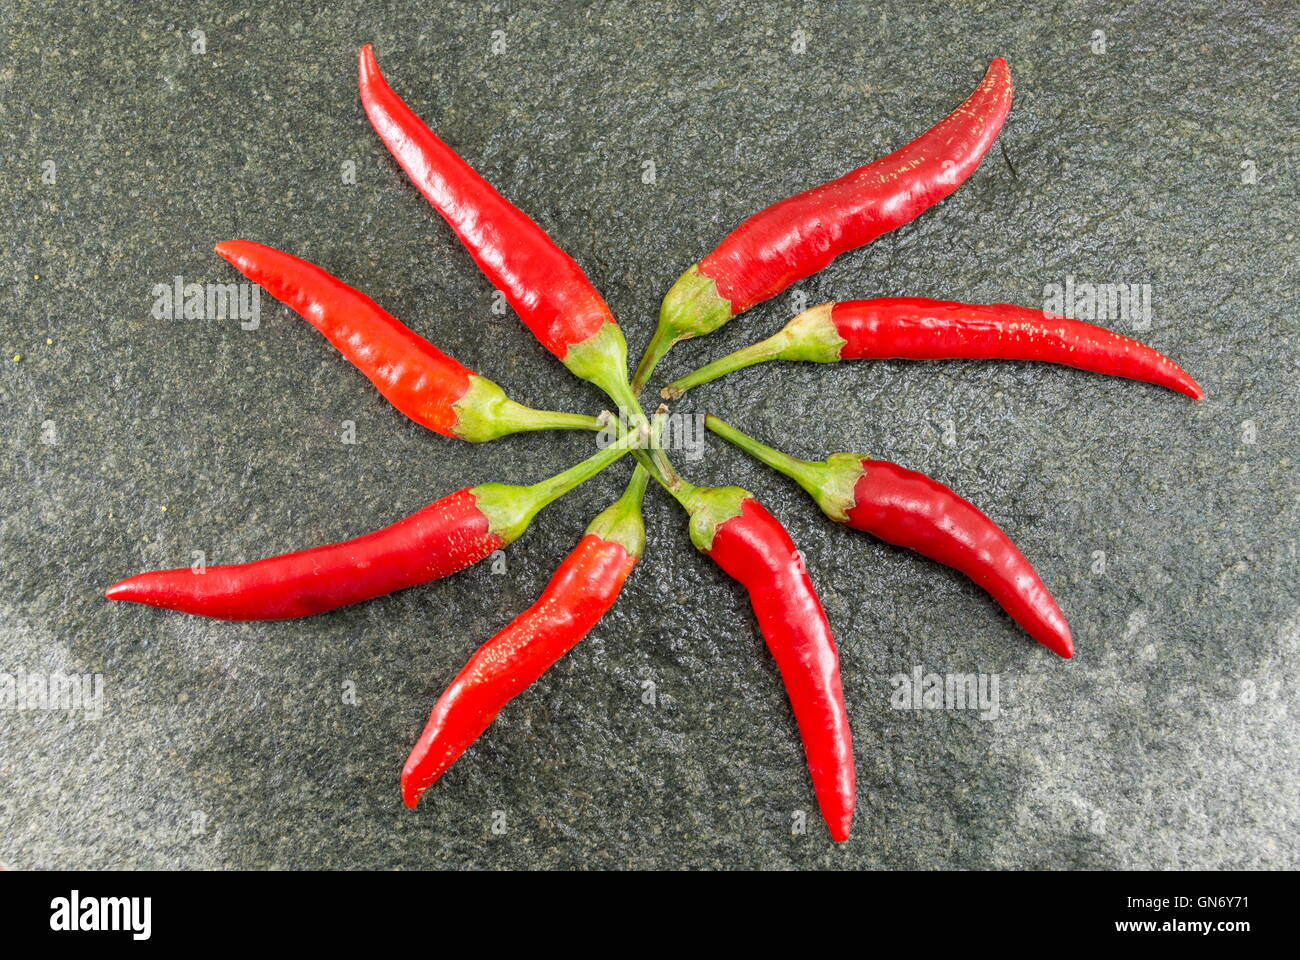 Red hot raw peppers on stone background Stock Photo